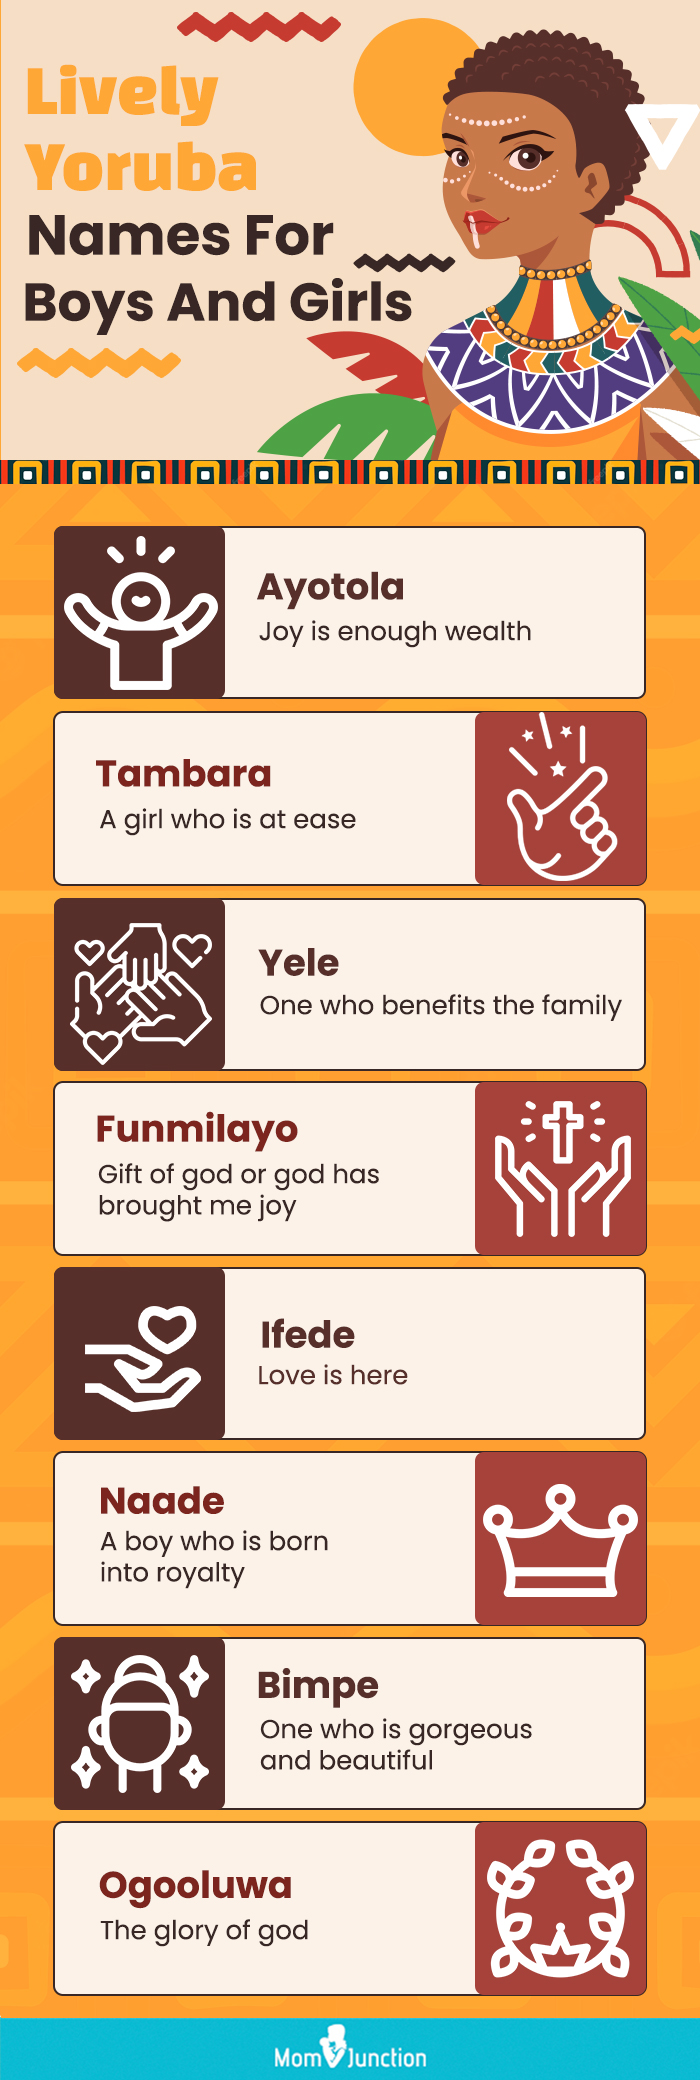 lively yoruba names for boys and girls (infographic)